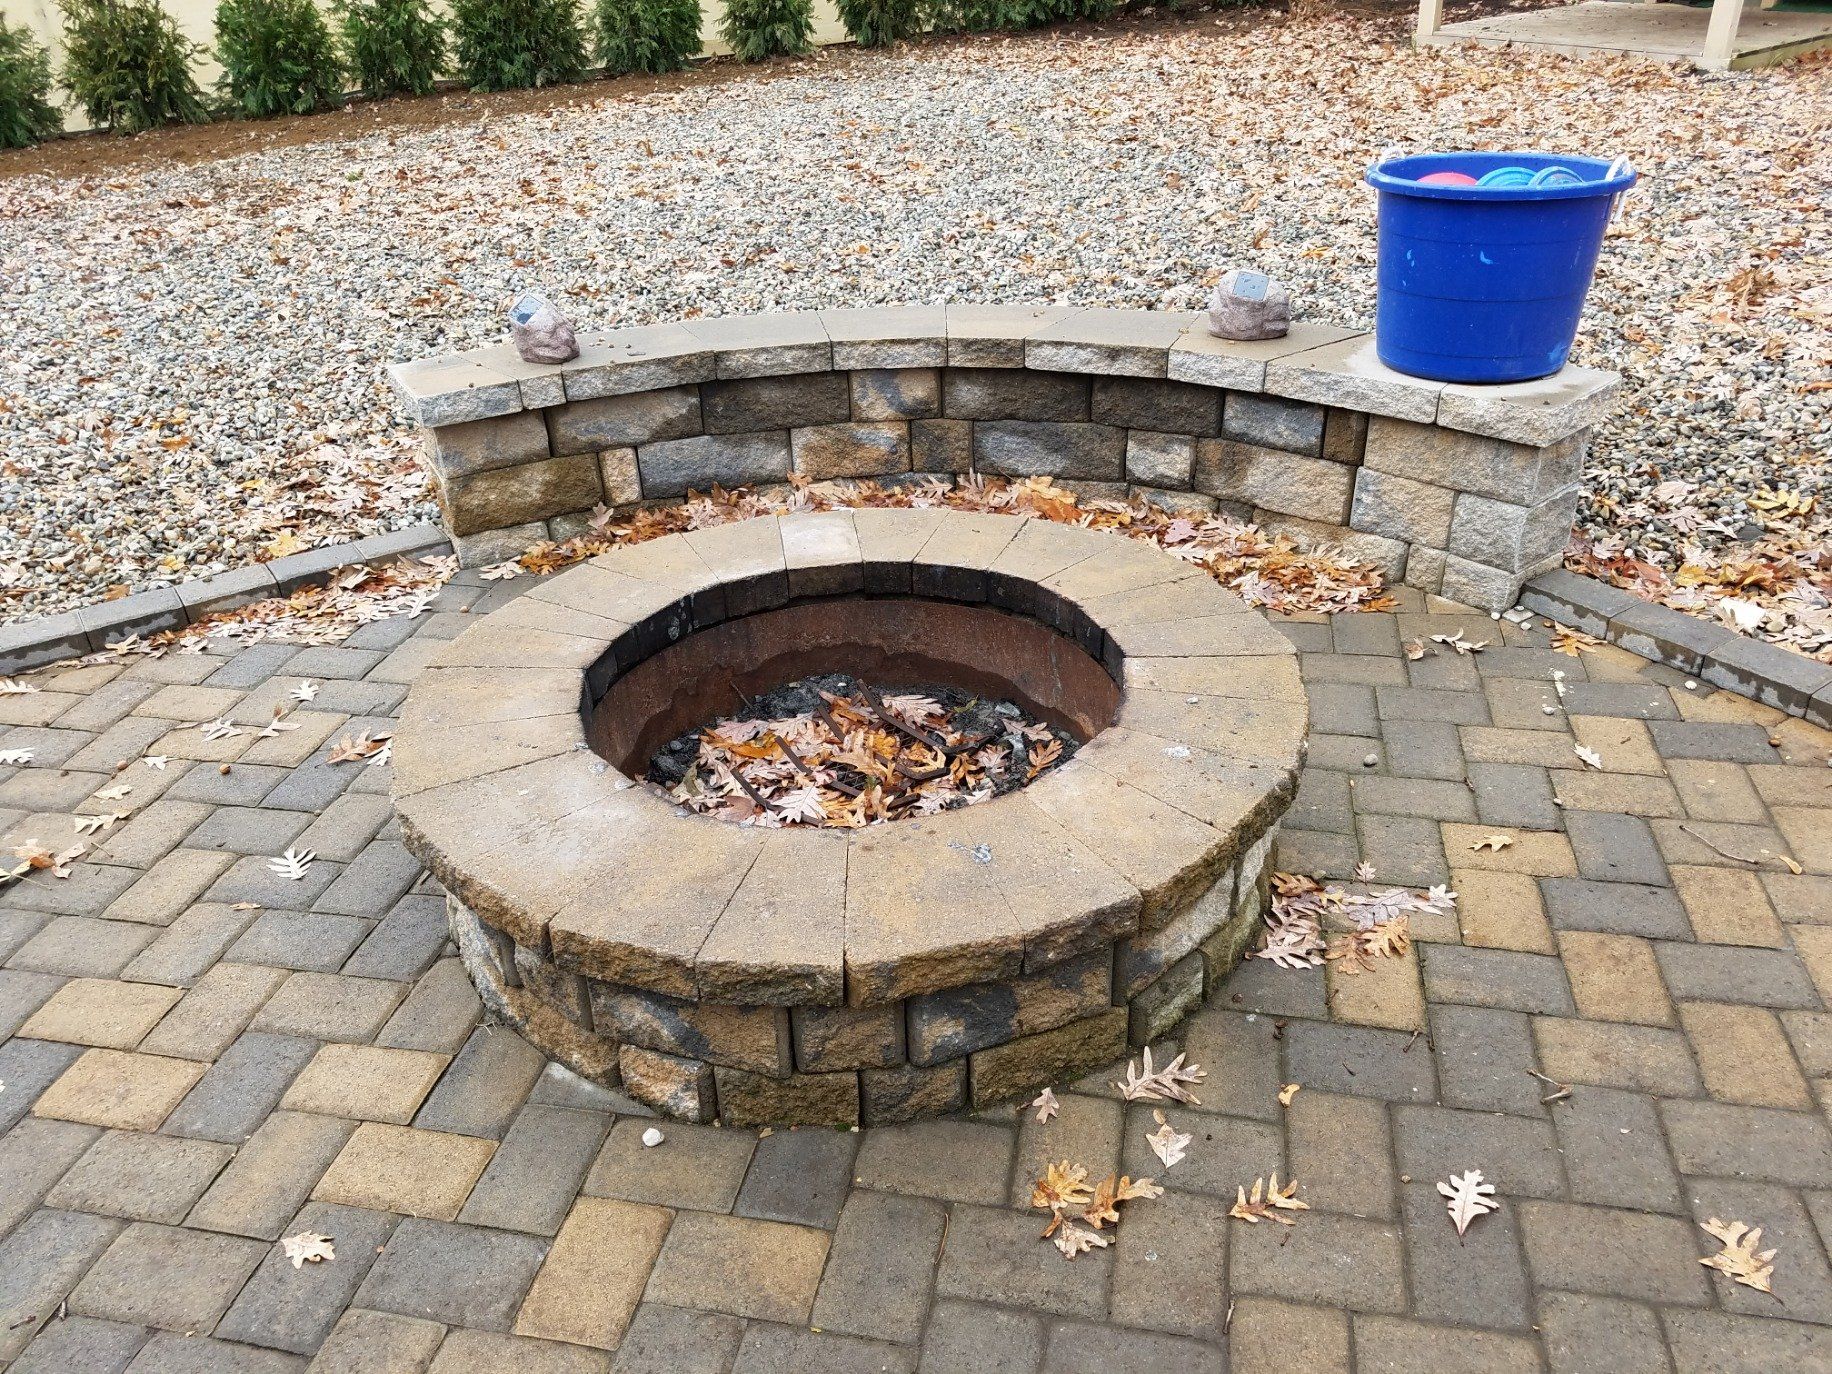 Fire Pit — Bistro Chairs and Table on Stone Paver Bricks Patio in Garden Backyard With Pond in Morris Plains, NJ